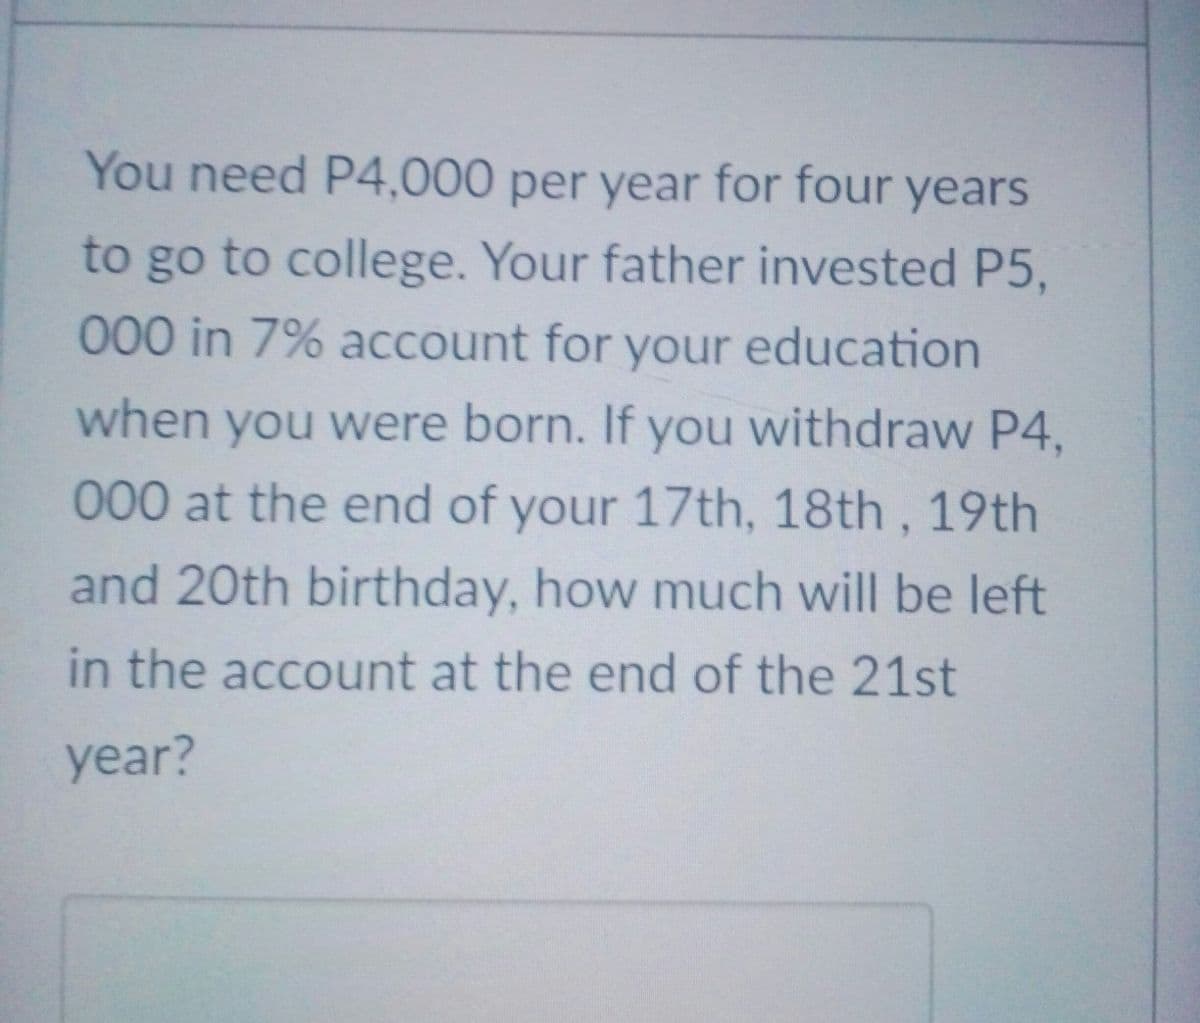 You need P4,000 per year for four years
to go to college. Your father invested P5,
000 in 7% account for your education
when you were born. If you withdraw P4,
00 0 at the end of your 17th, 18th, 19th
and 20th birthday, how much will be left
in the account at the end of the 21st
year?
